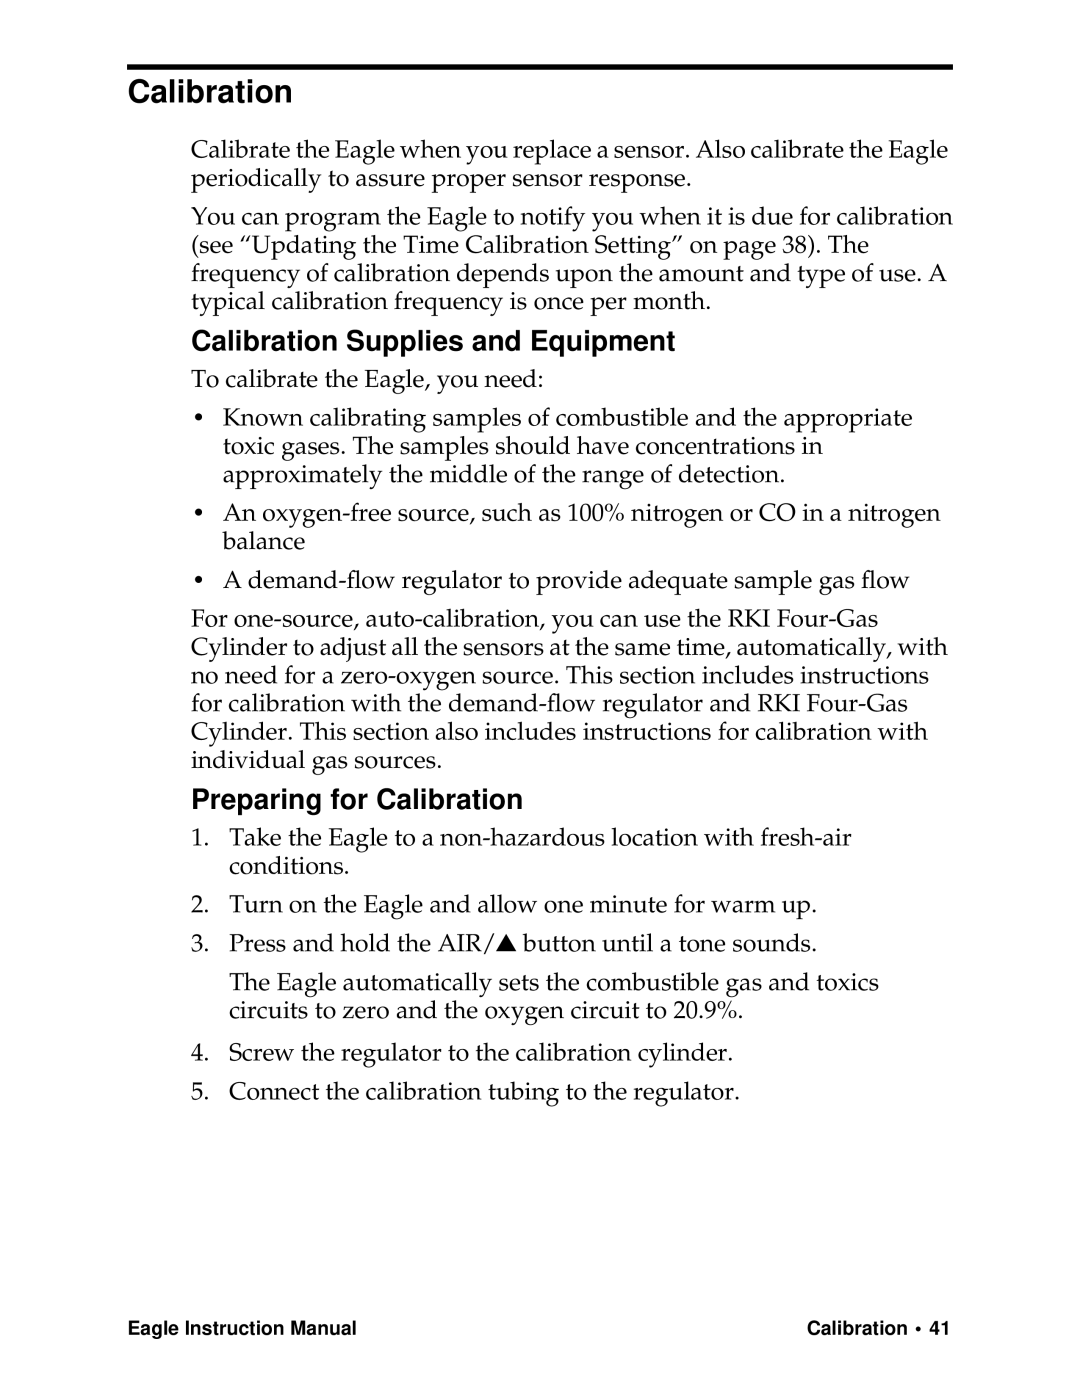 Eagle Home Products Eagle Series instruction manual Calibration Supplies and Equipment, Preparing for Calibration 